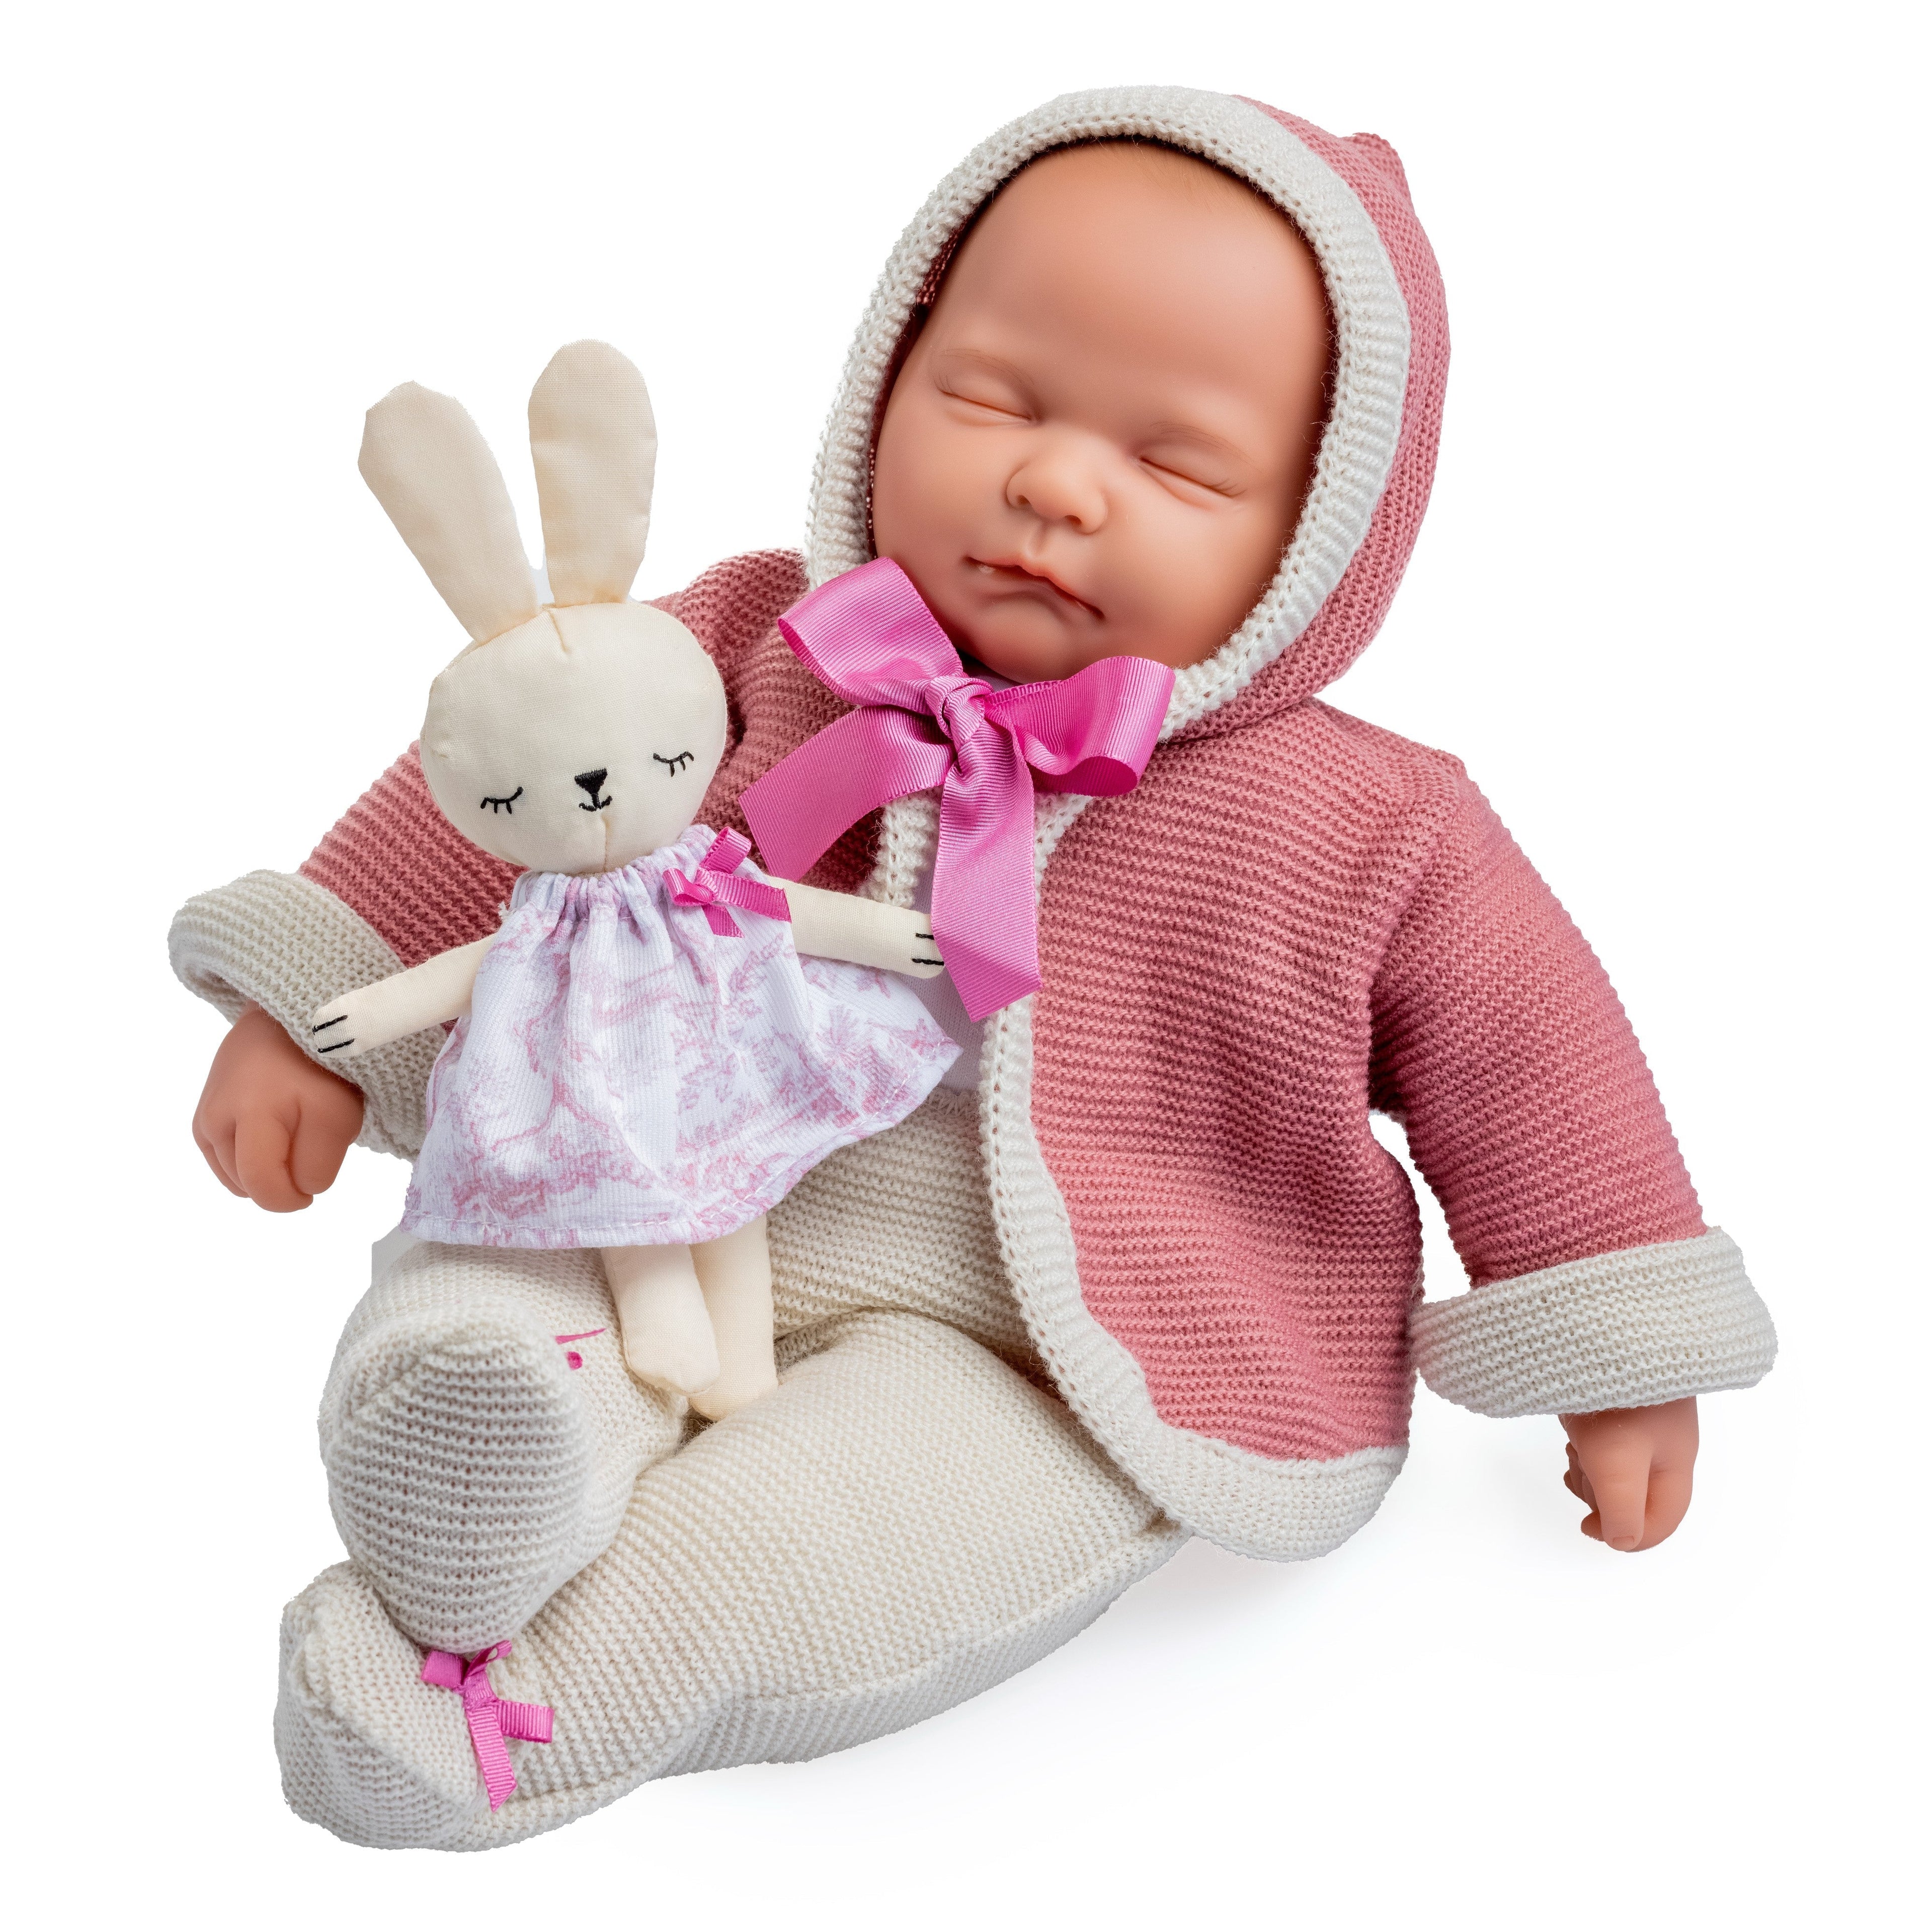 La Baby Soft Body Doll in Original Pink Collection Gift Set with Closed Eyes